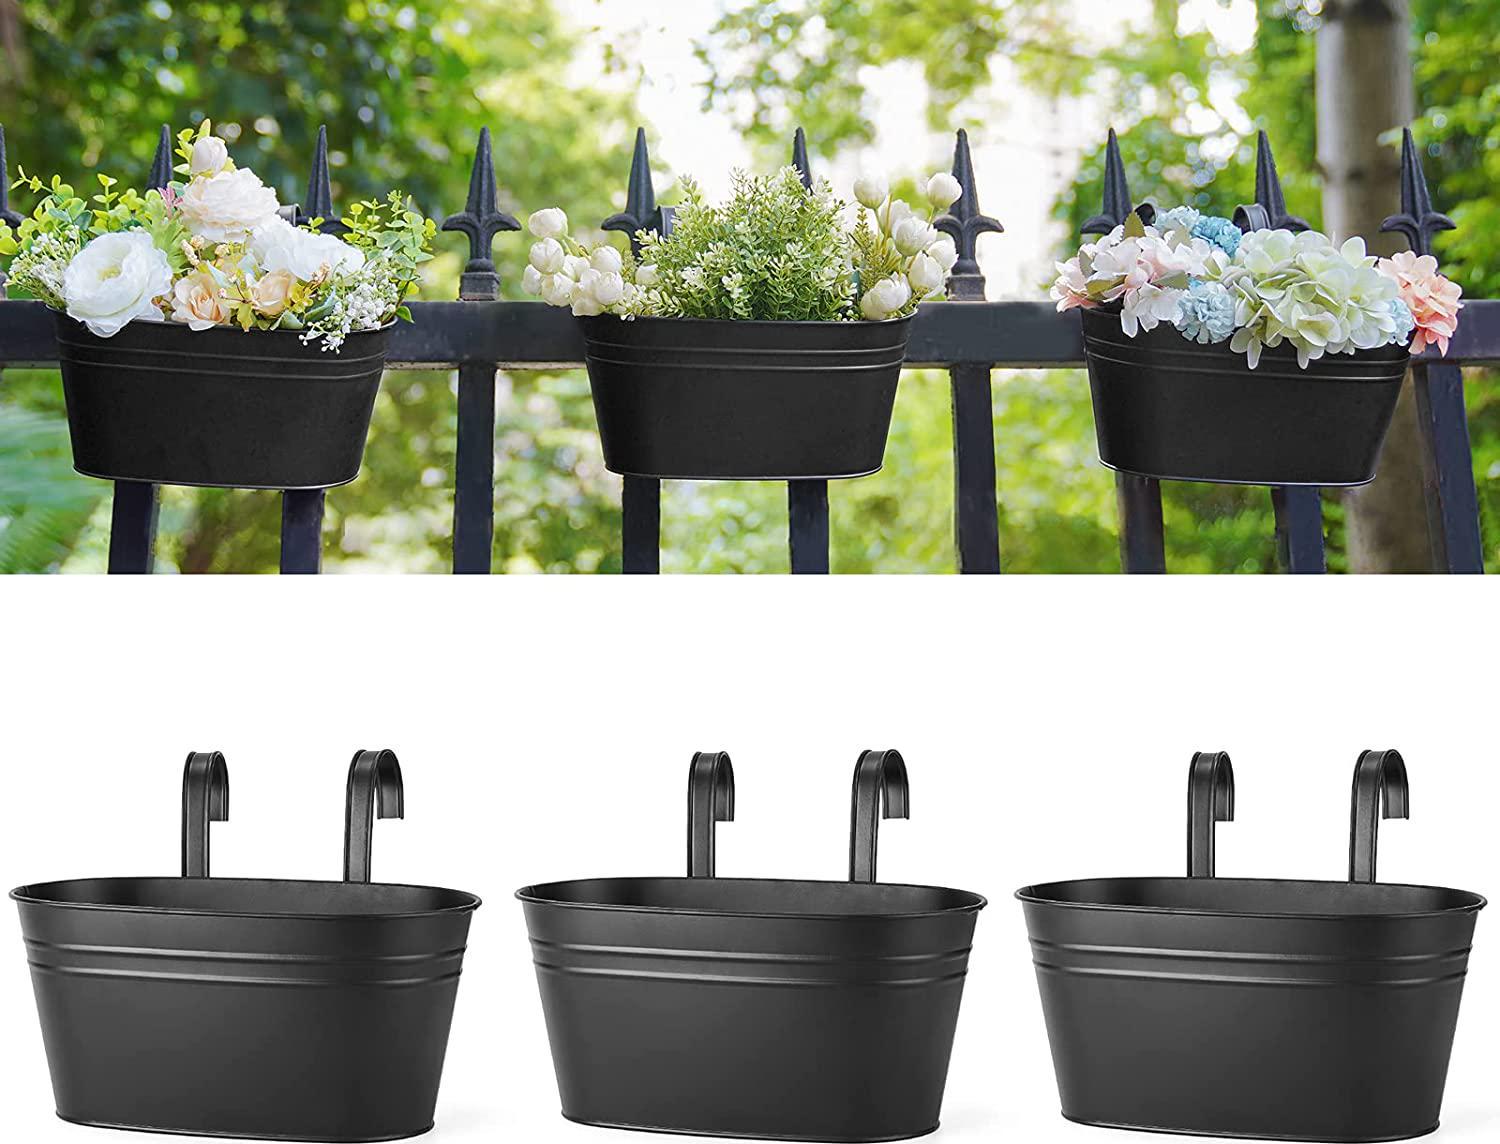 Dahey Metal Iron Hanging Flower Pots for Railing Fence Hanging Bucket Pots Countryside Style Window Flower Plant Holder with Detachable Hooks Home Decor,Black,3 Pcs-